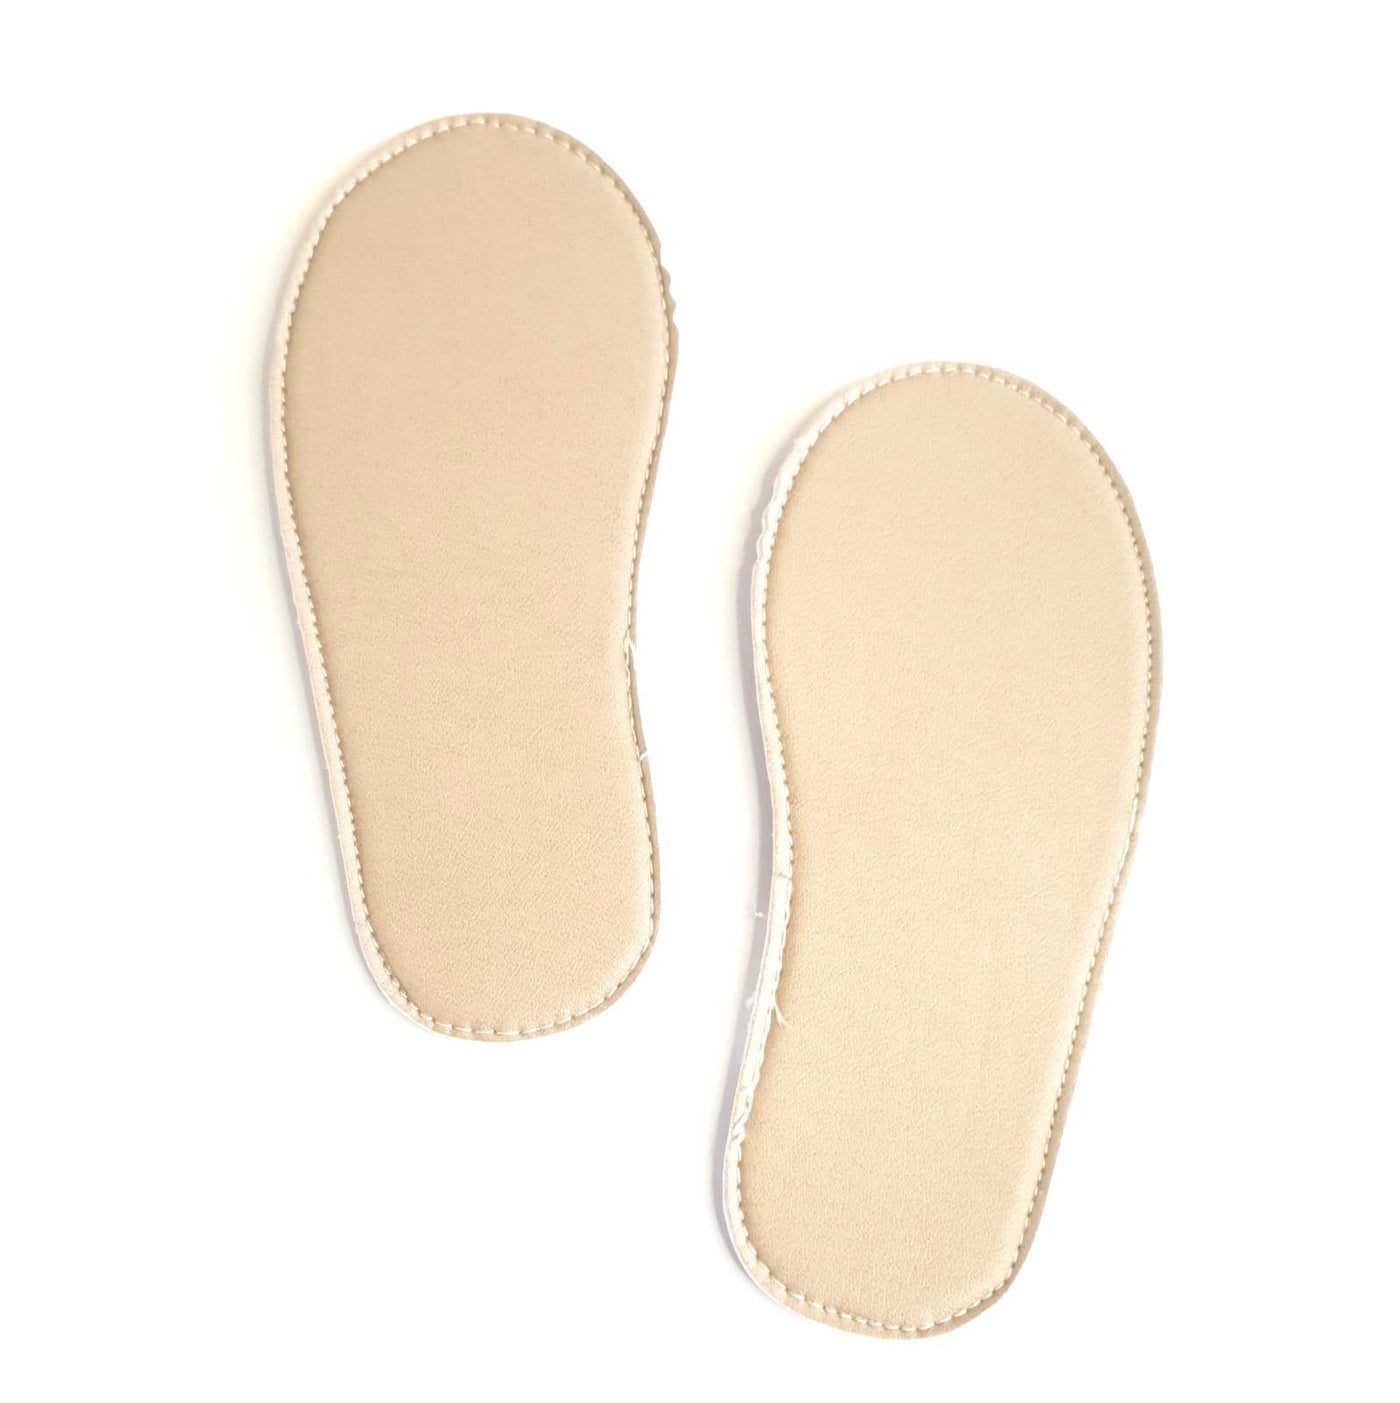 Replacement INNER-SOLES for our entire range